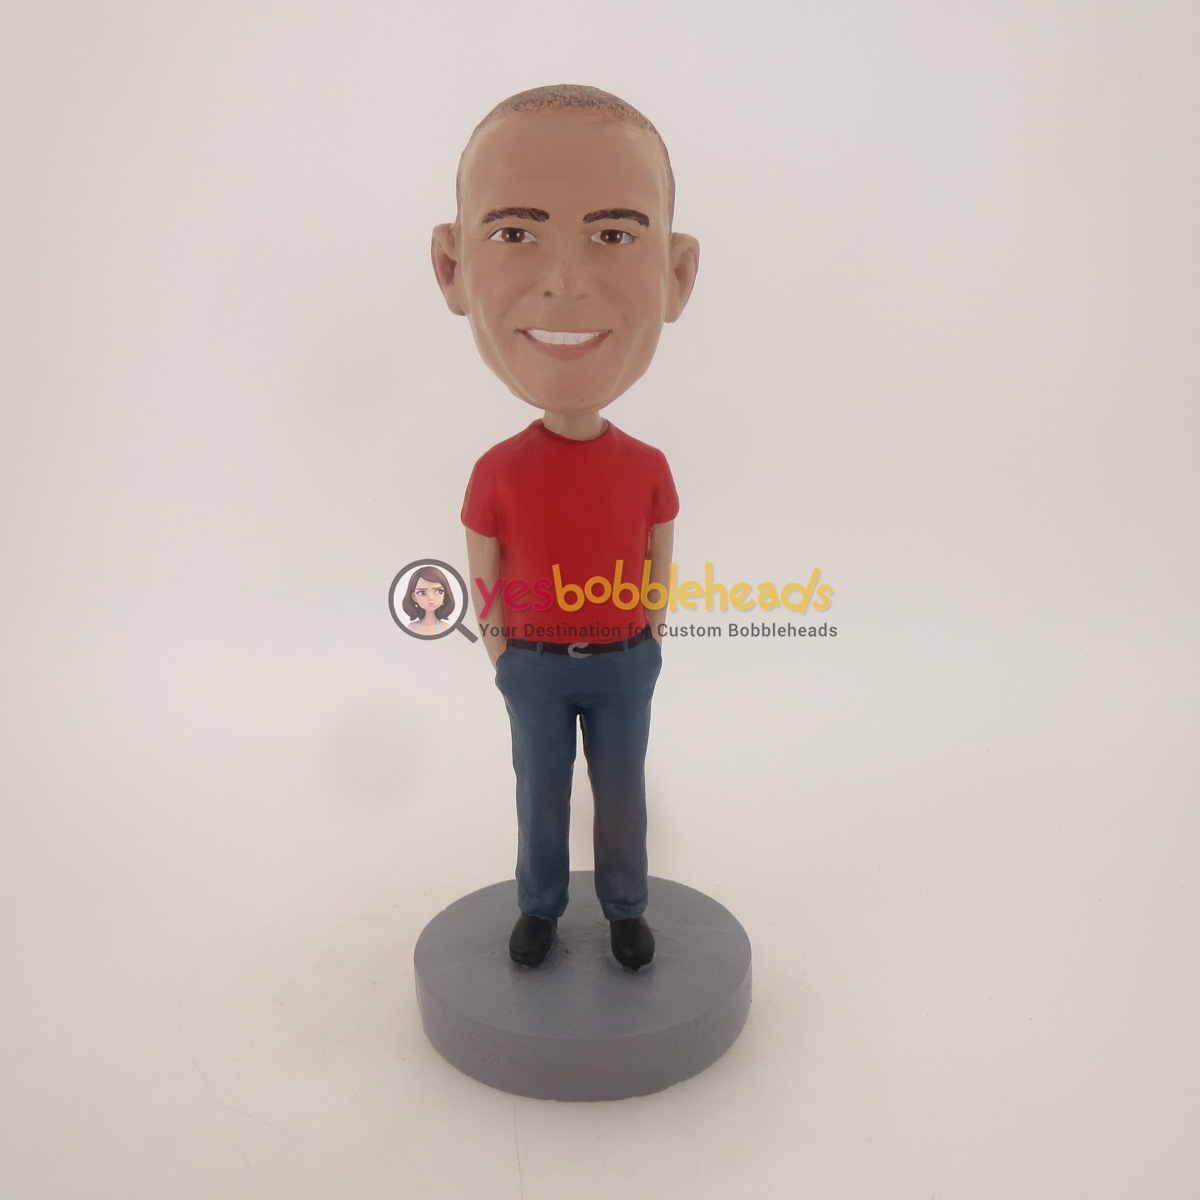 Picture of Custom Bobblehead Doll: Man In Red TShirt And Blue Jeans